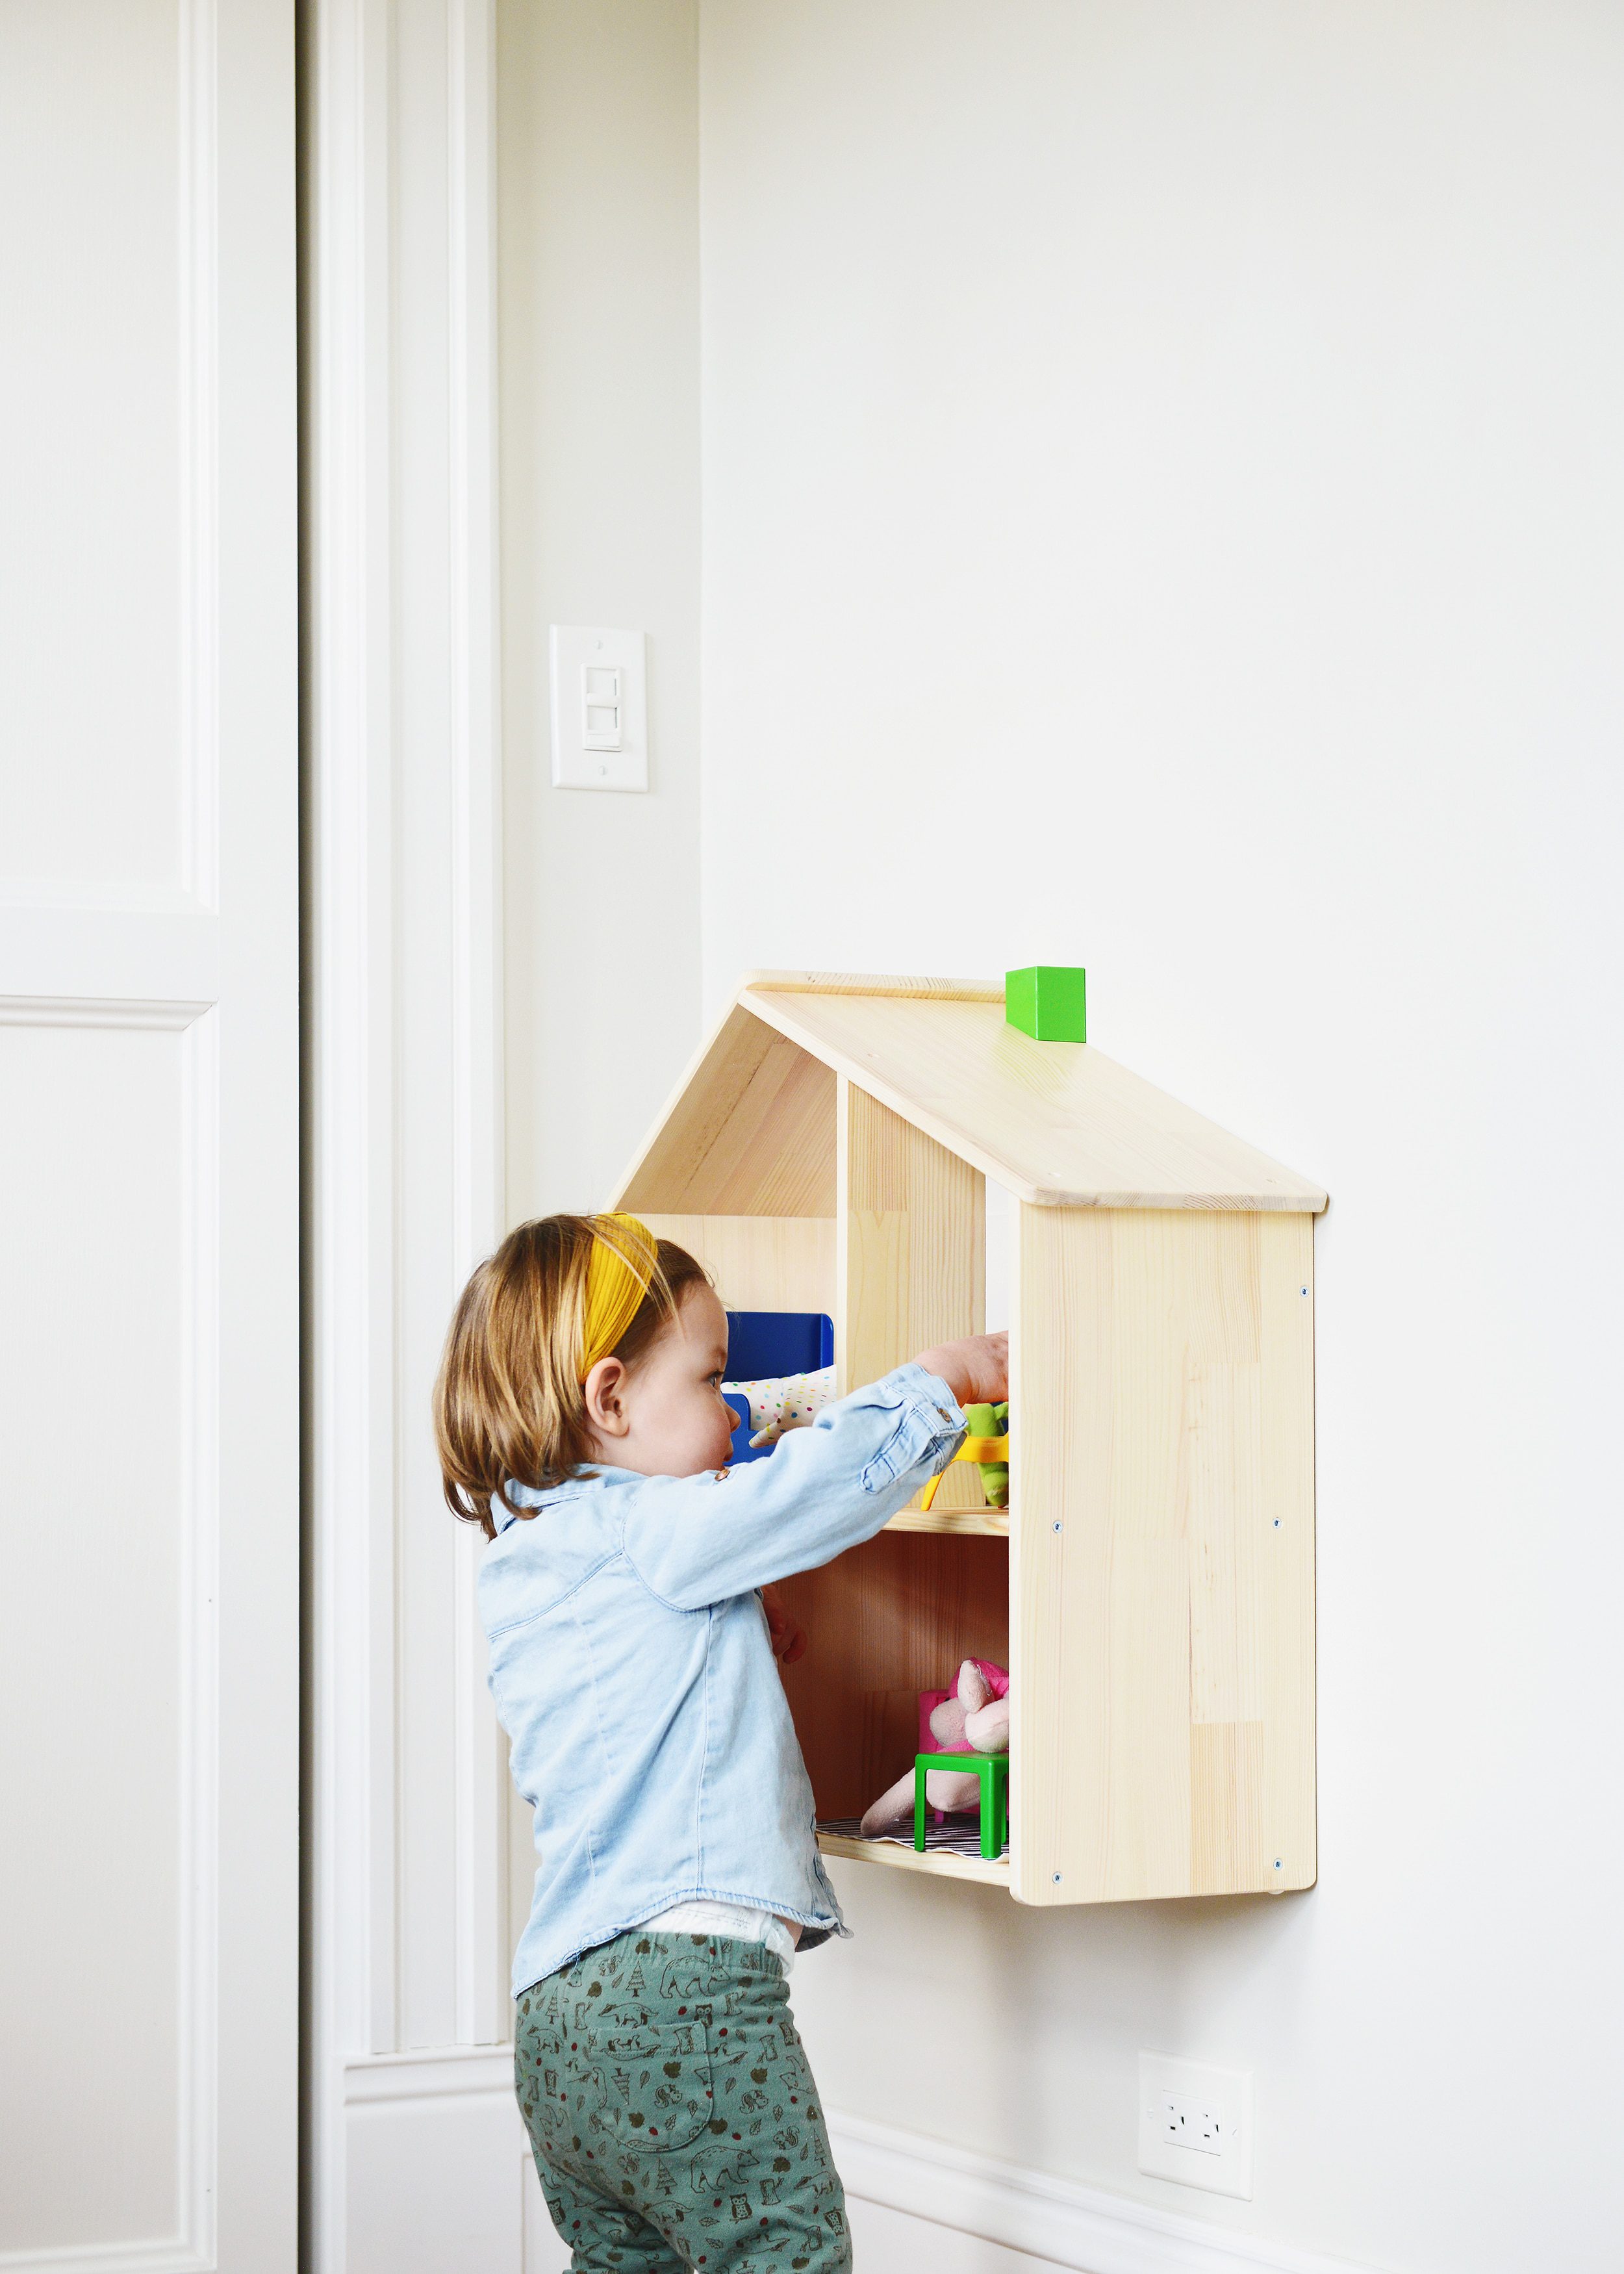 Lucy playing with her IKEA doll house | via Yellow Brick Home